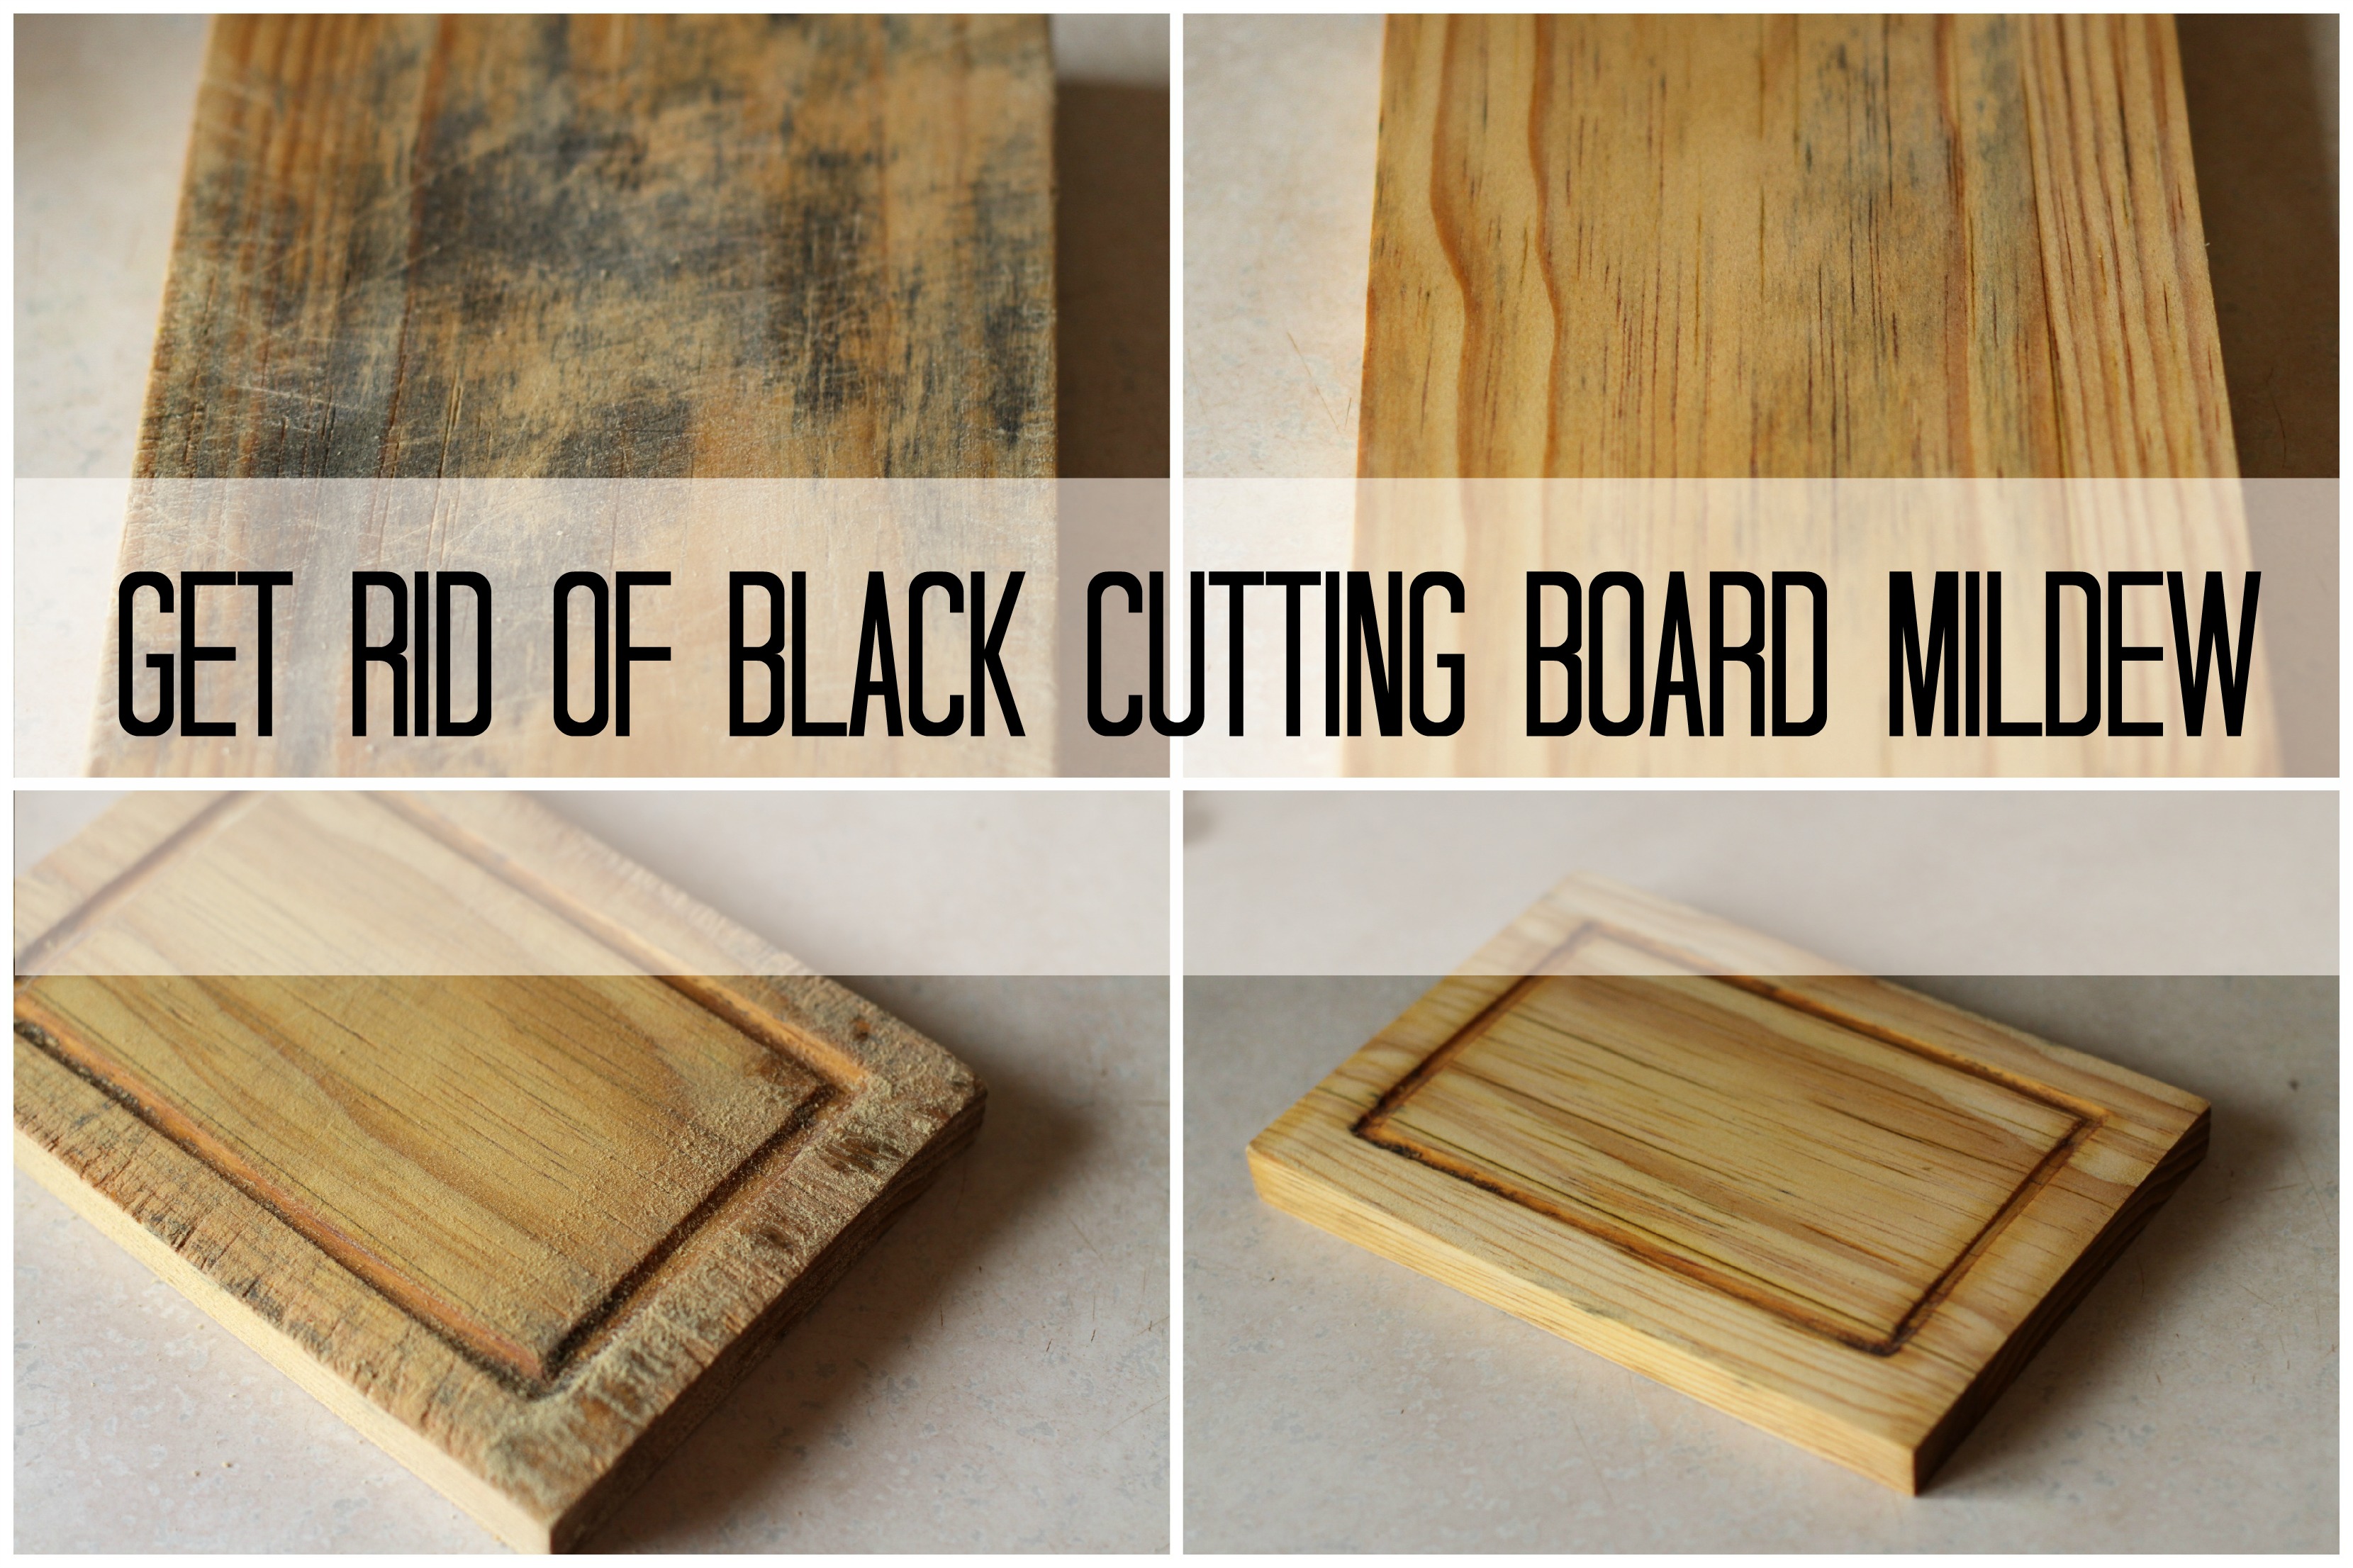 How to get rid of black cutting board mildew - The Frugal Girl